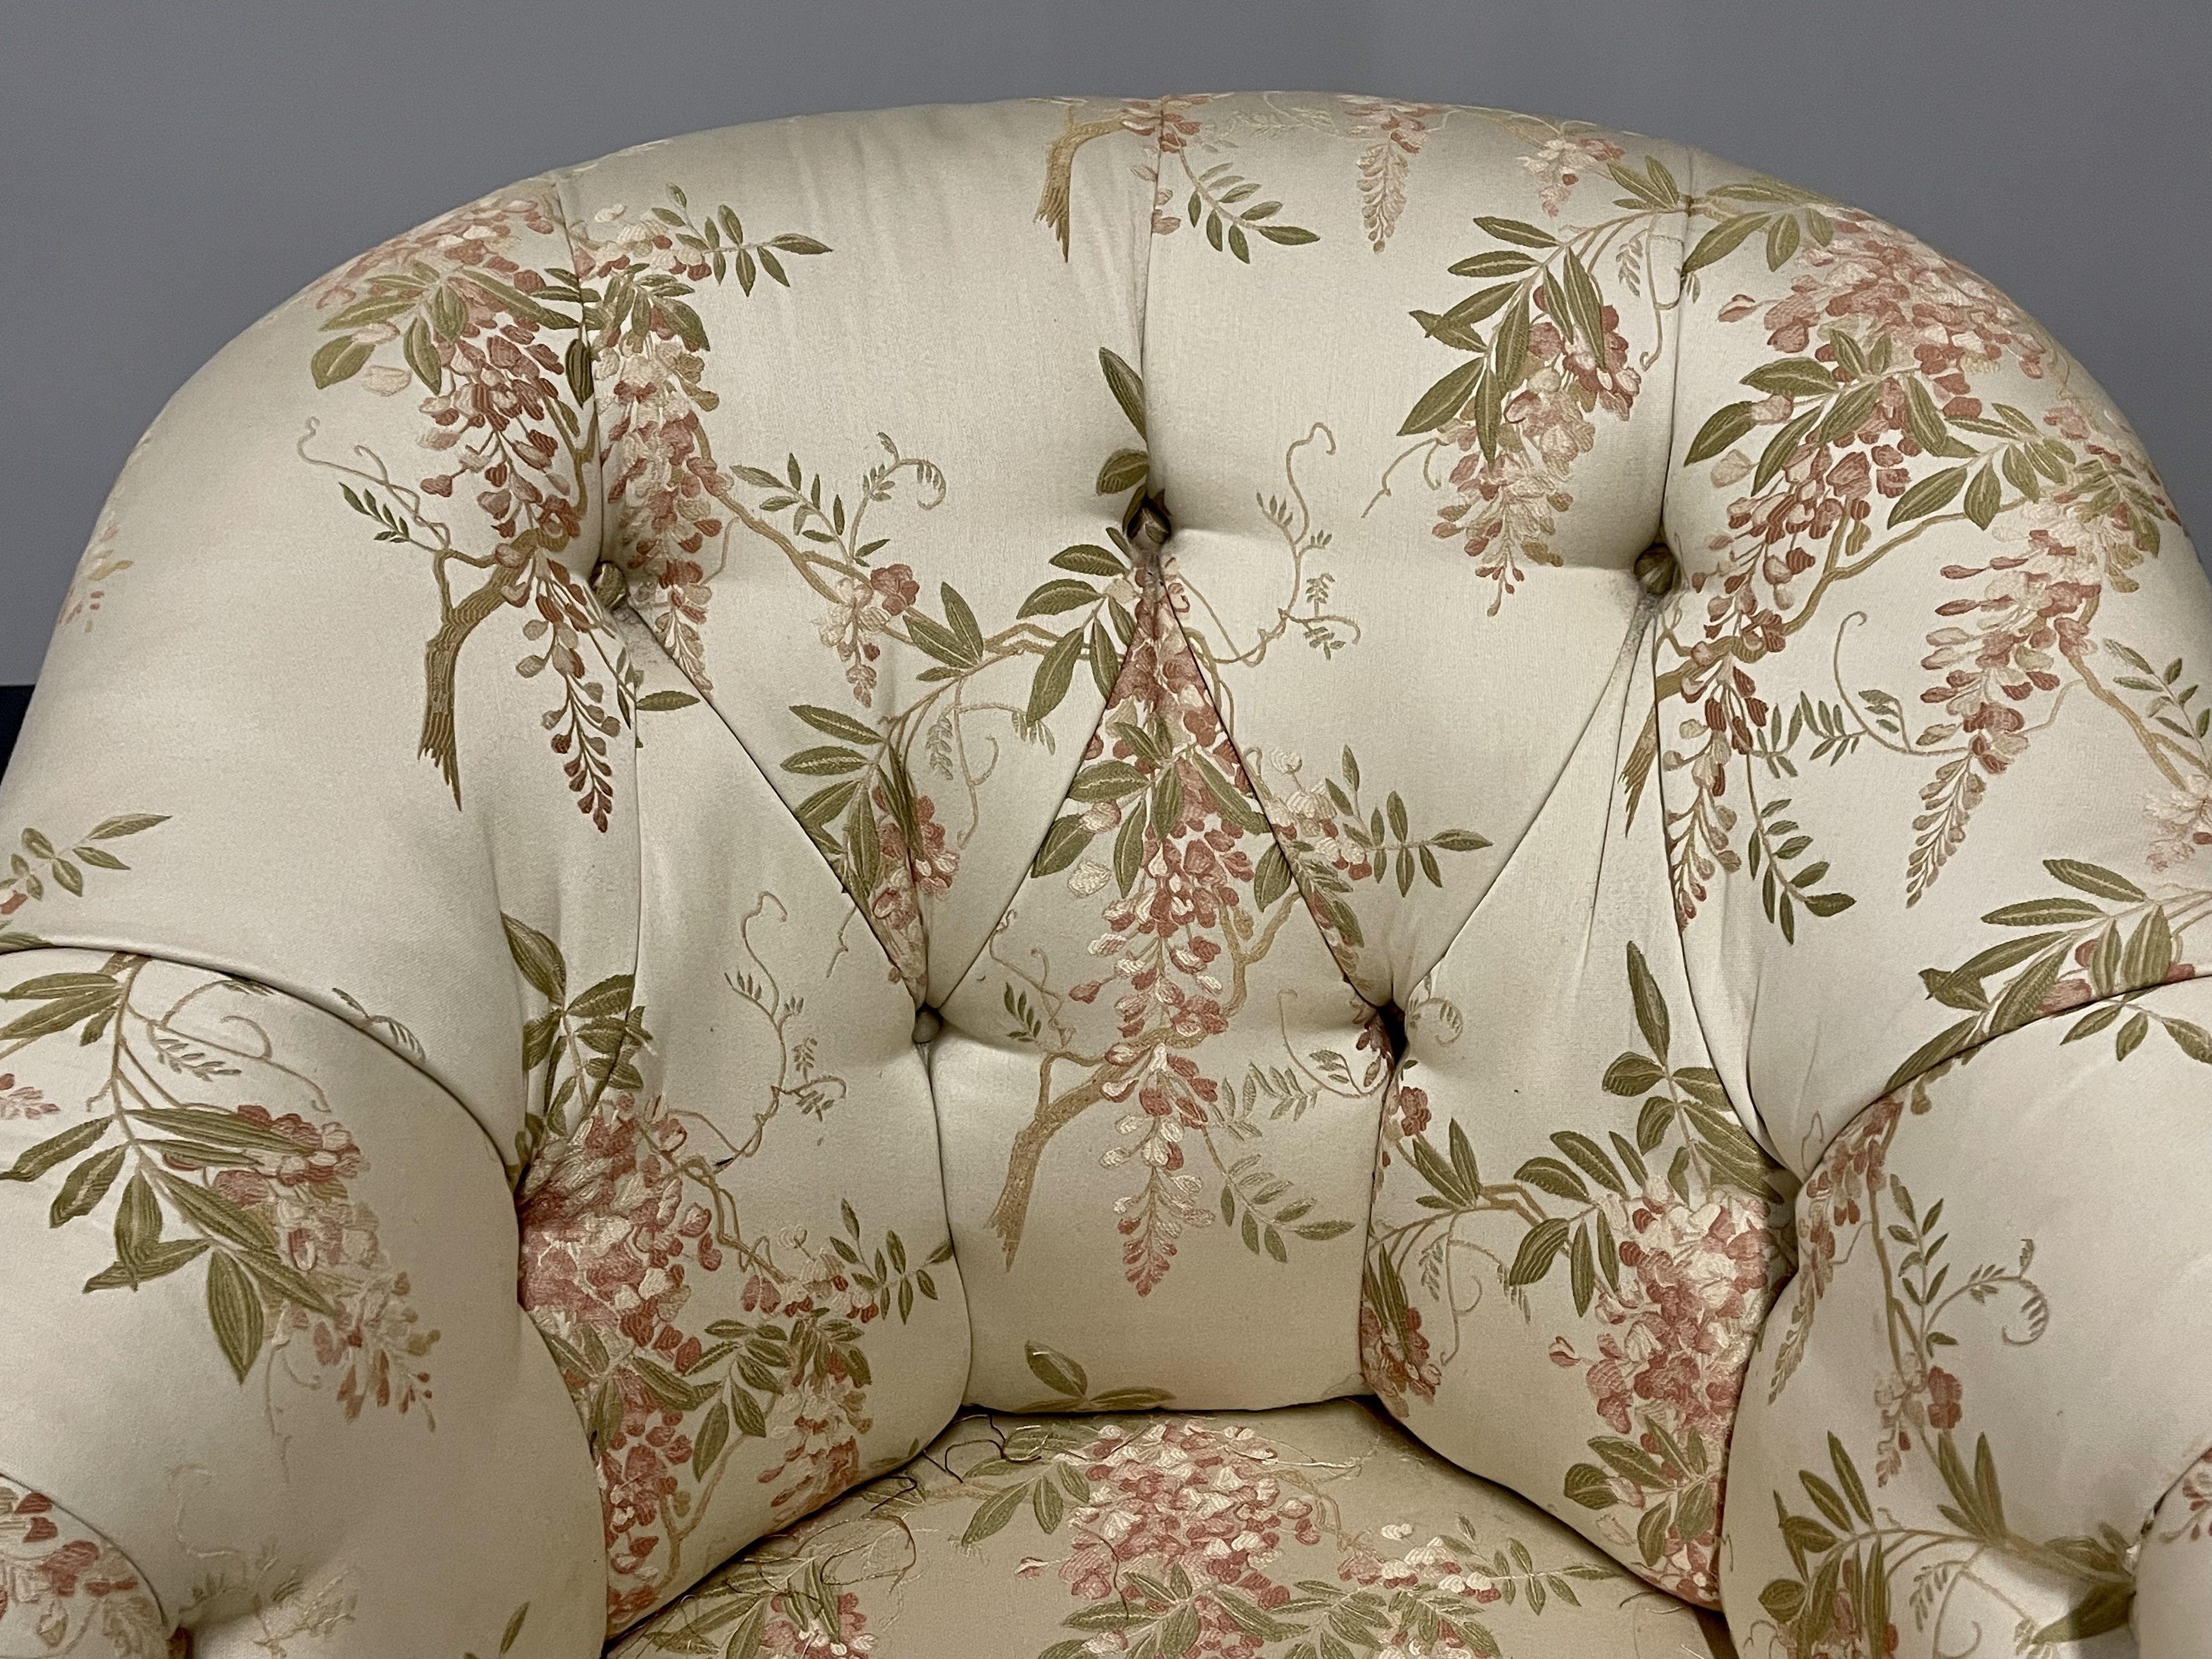 Fabric Pair of Floral Swivel Chairs, Milo Baughman, Scalamandré, Lounge Chairs